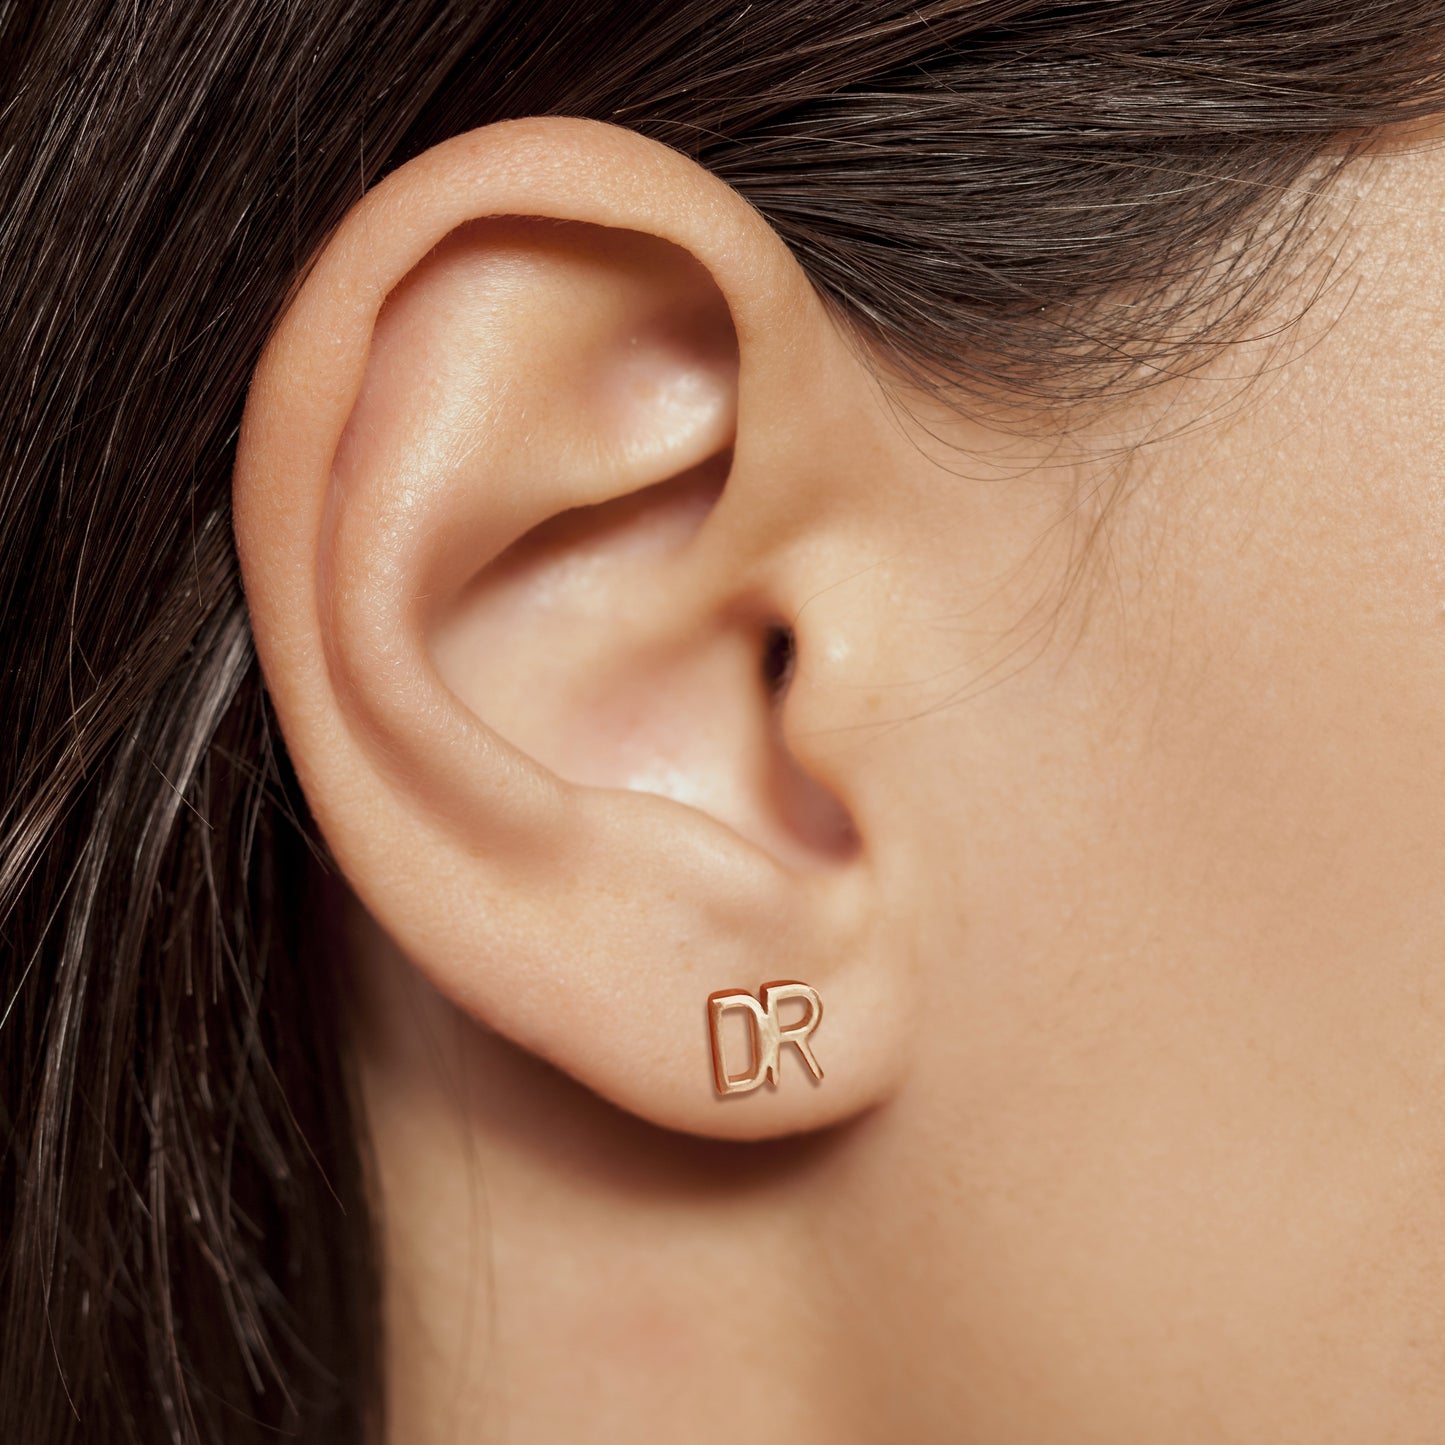 DR Earrings for doctors in rose gold